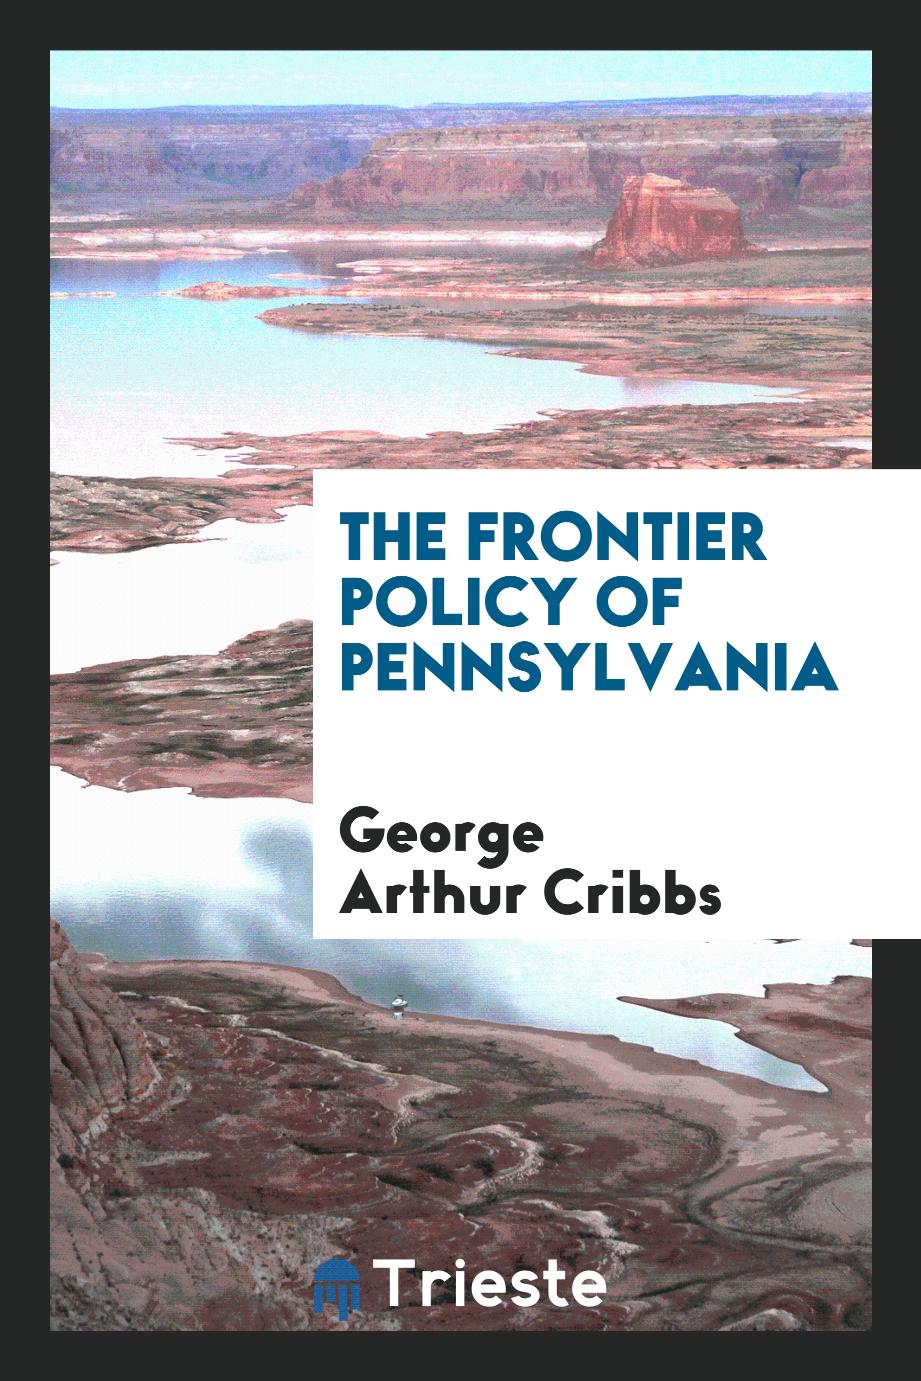 The Frontier Policy of Pennsylvania